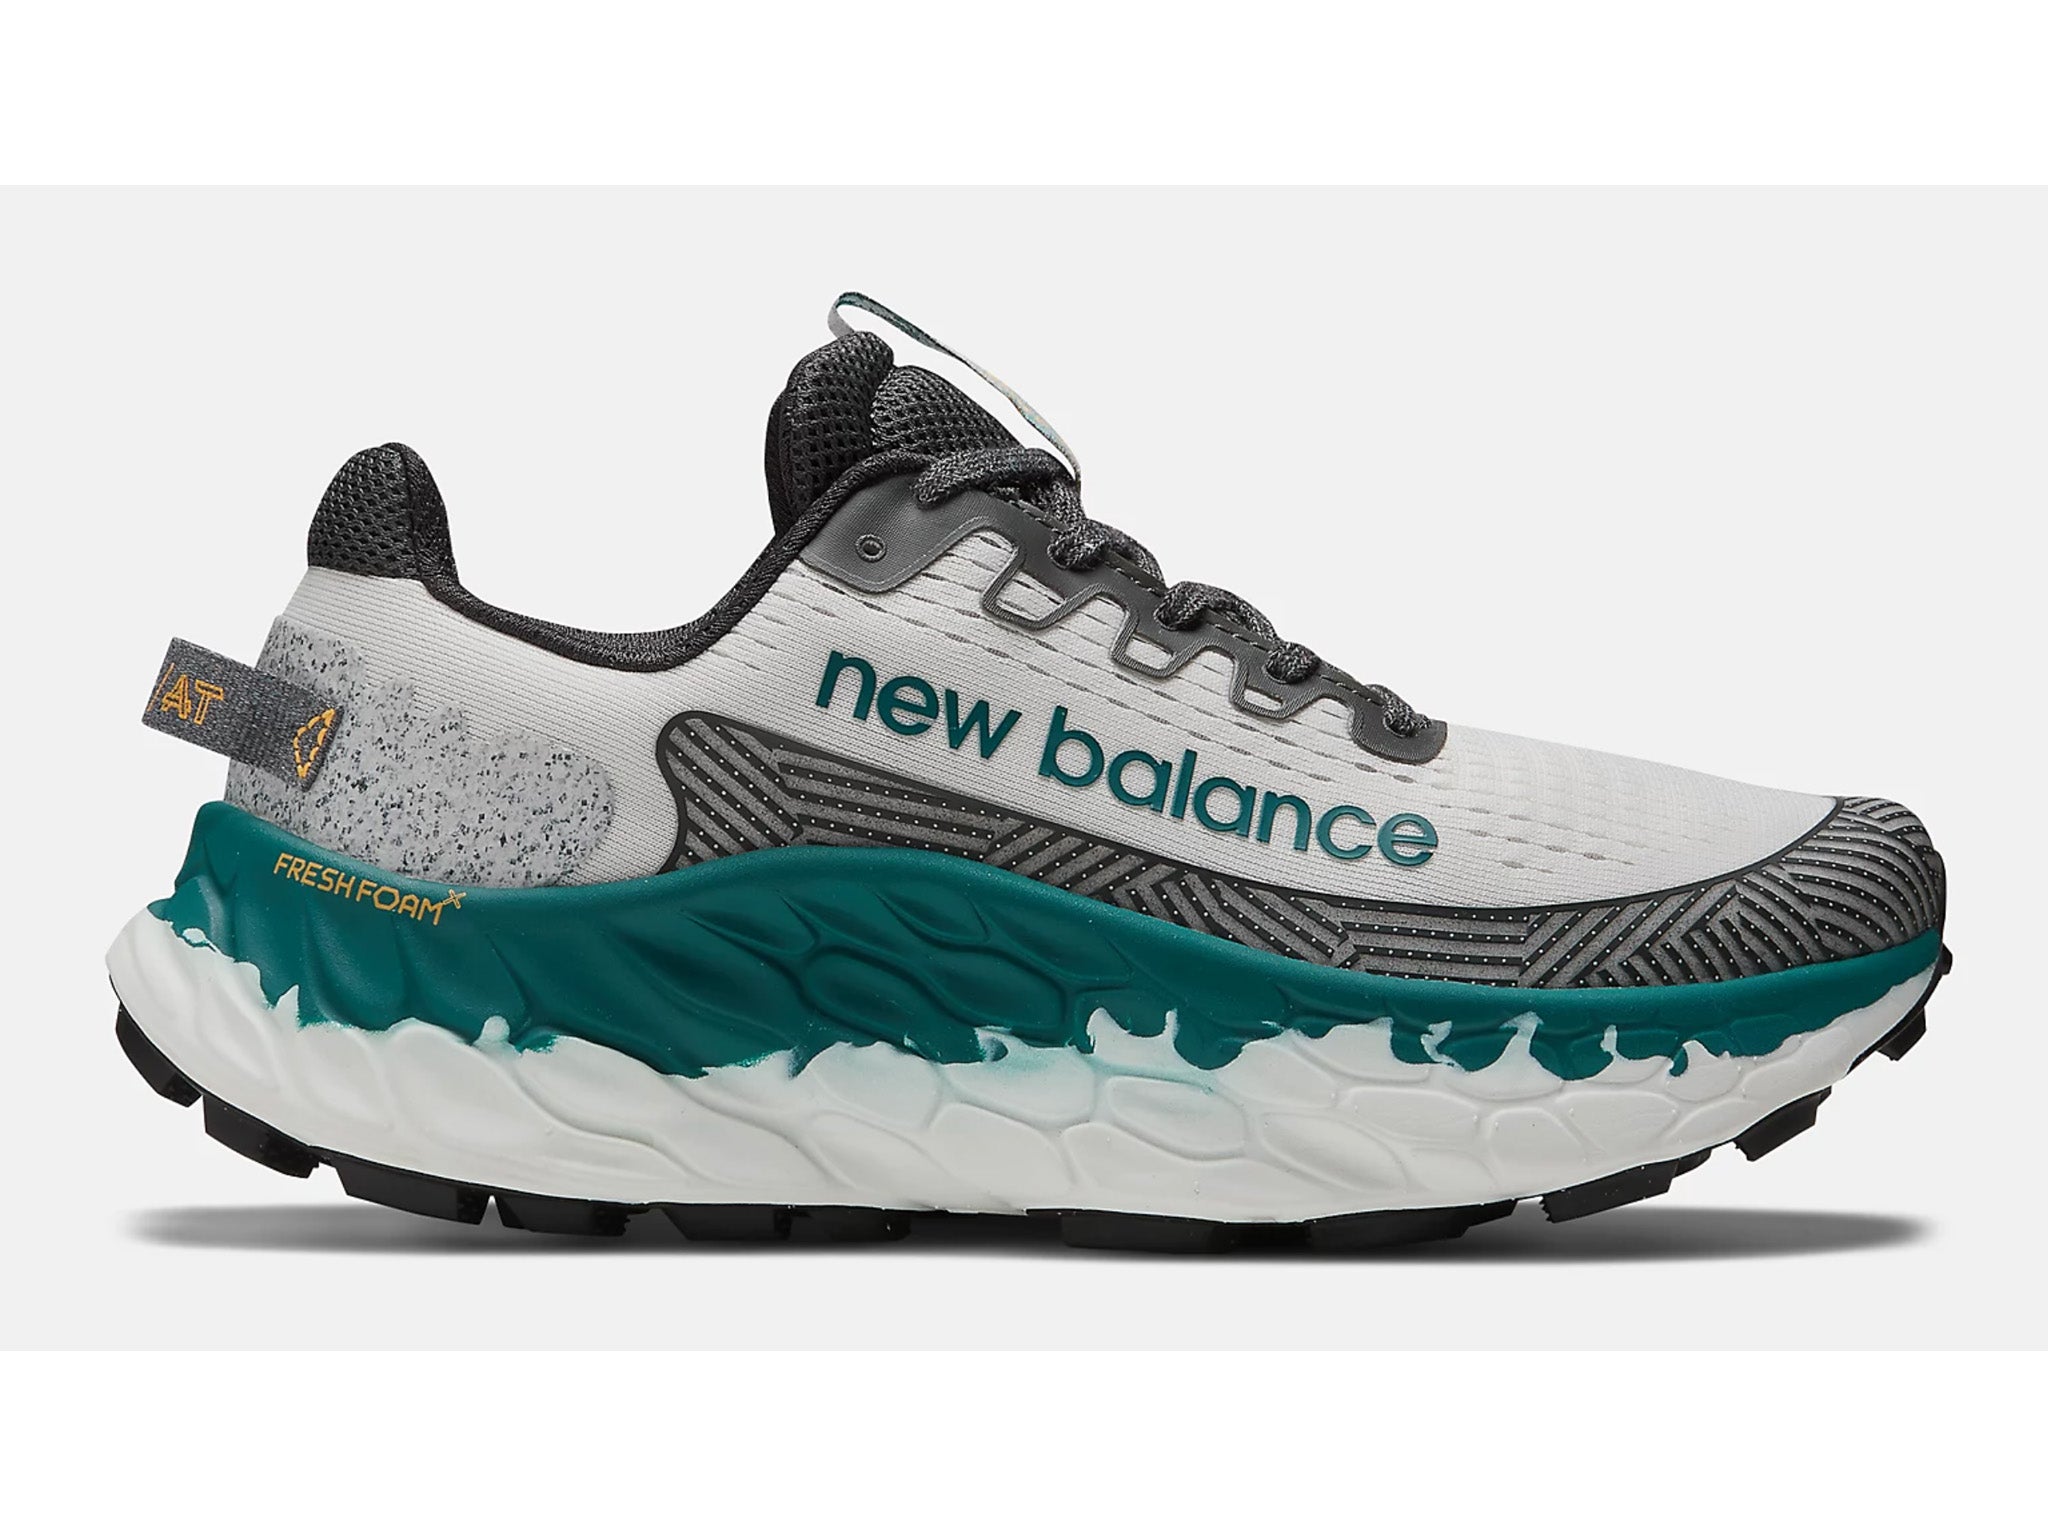 New-balance-Indybest-review.